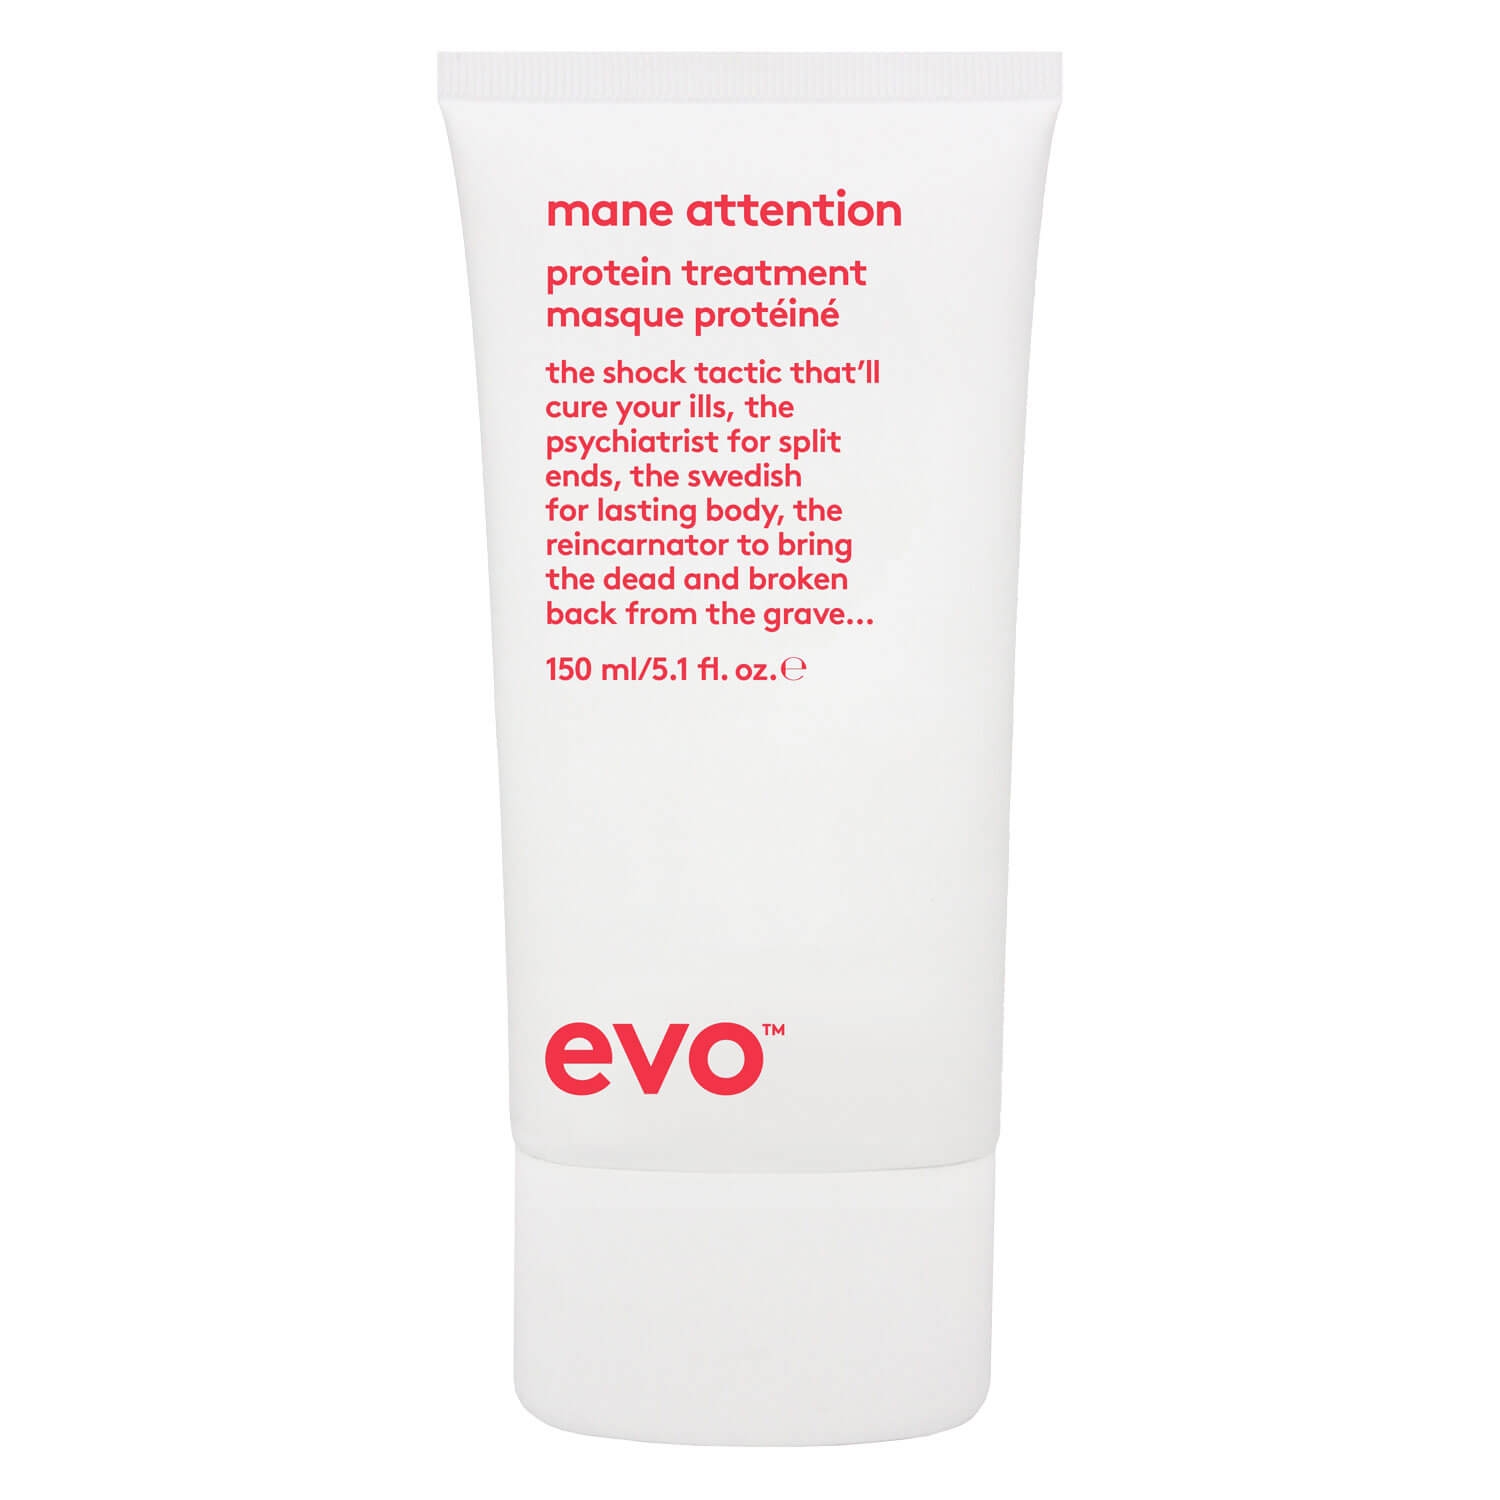 Product image from evo care - mane attention protein treatment